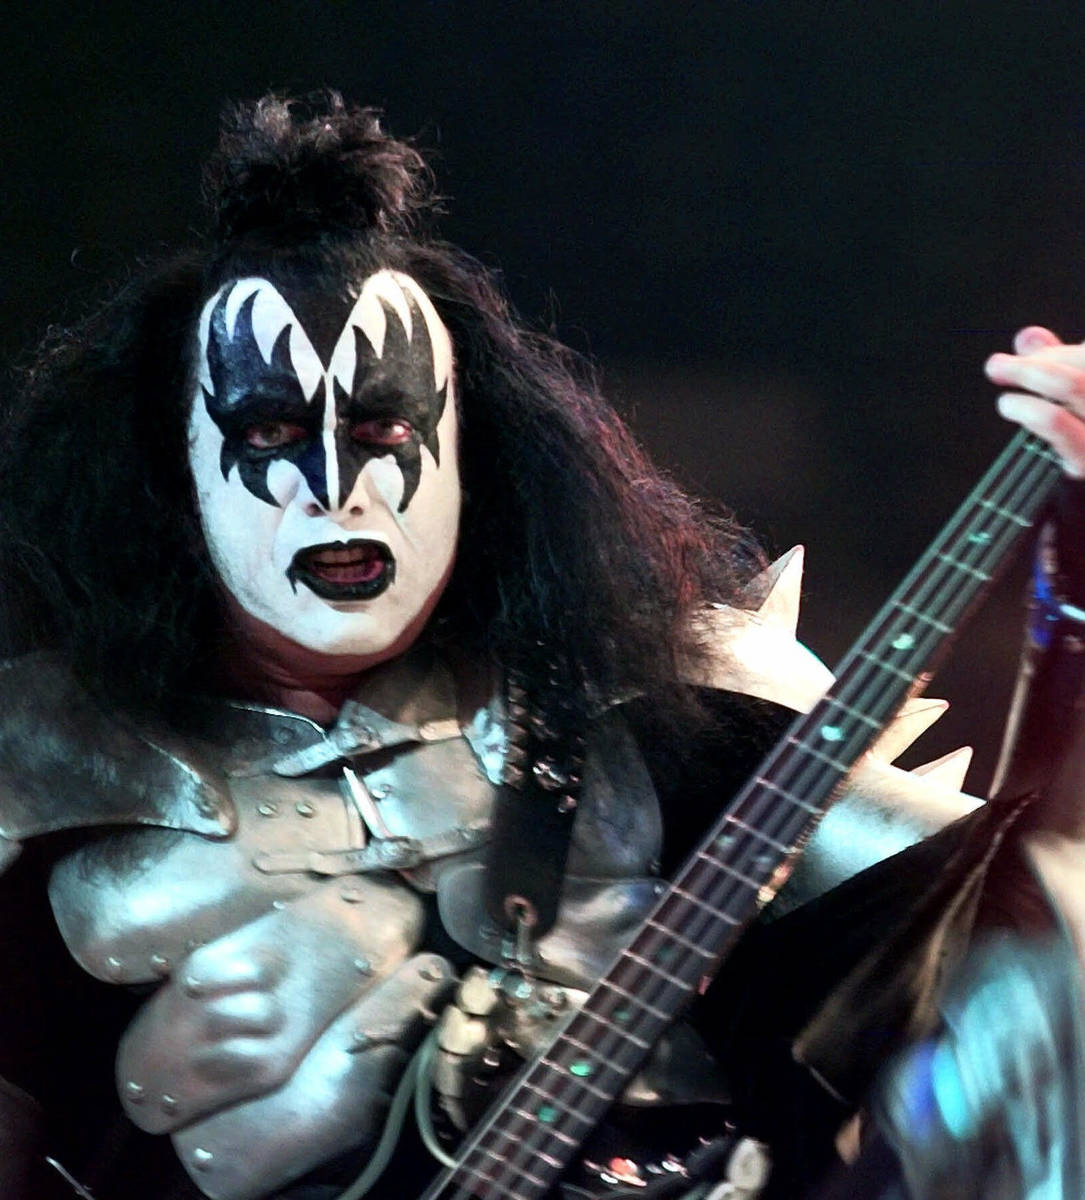 Bassist Gene Simmons presents the onstage personality of The Demon as Kiss performs in its &quo ...